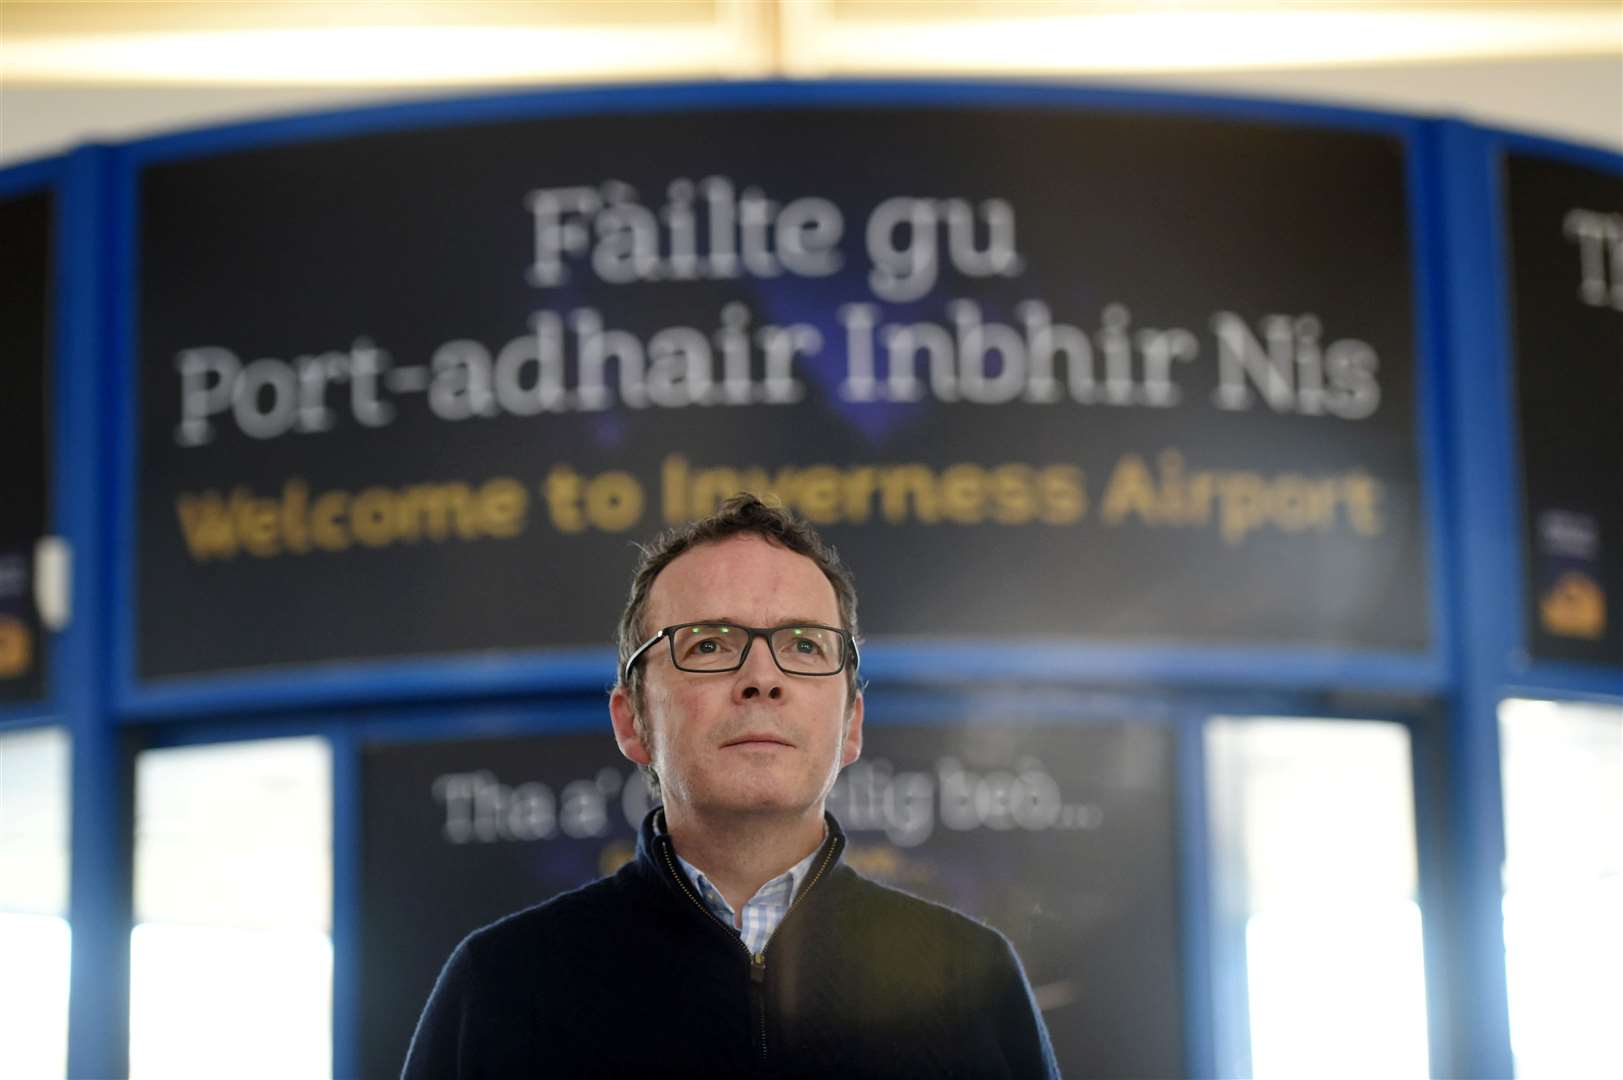 Inglis Lyon, managing director of Highlands and Islands Airports Ltd, says the focus is on providing a safe, modern and efficient means of handling aircraft for the regions and the islands. Picture: Callum Mackay